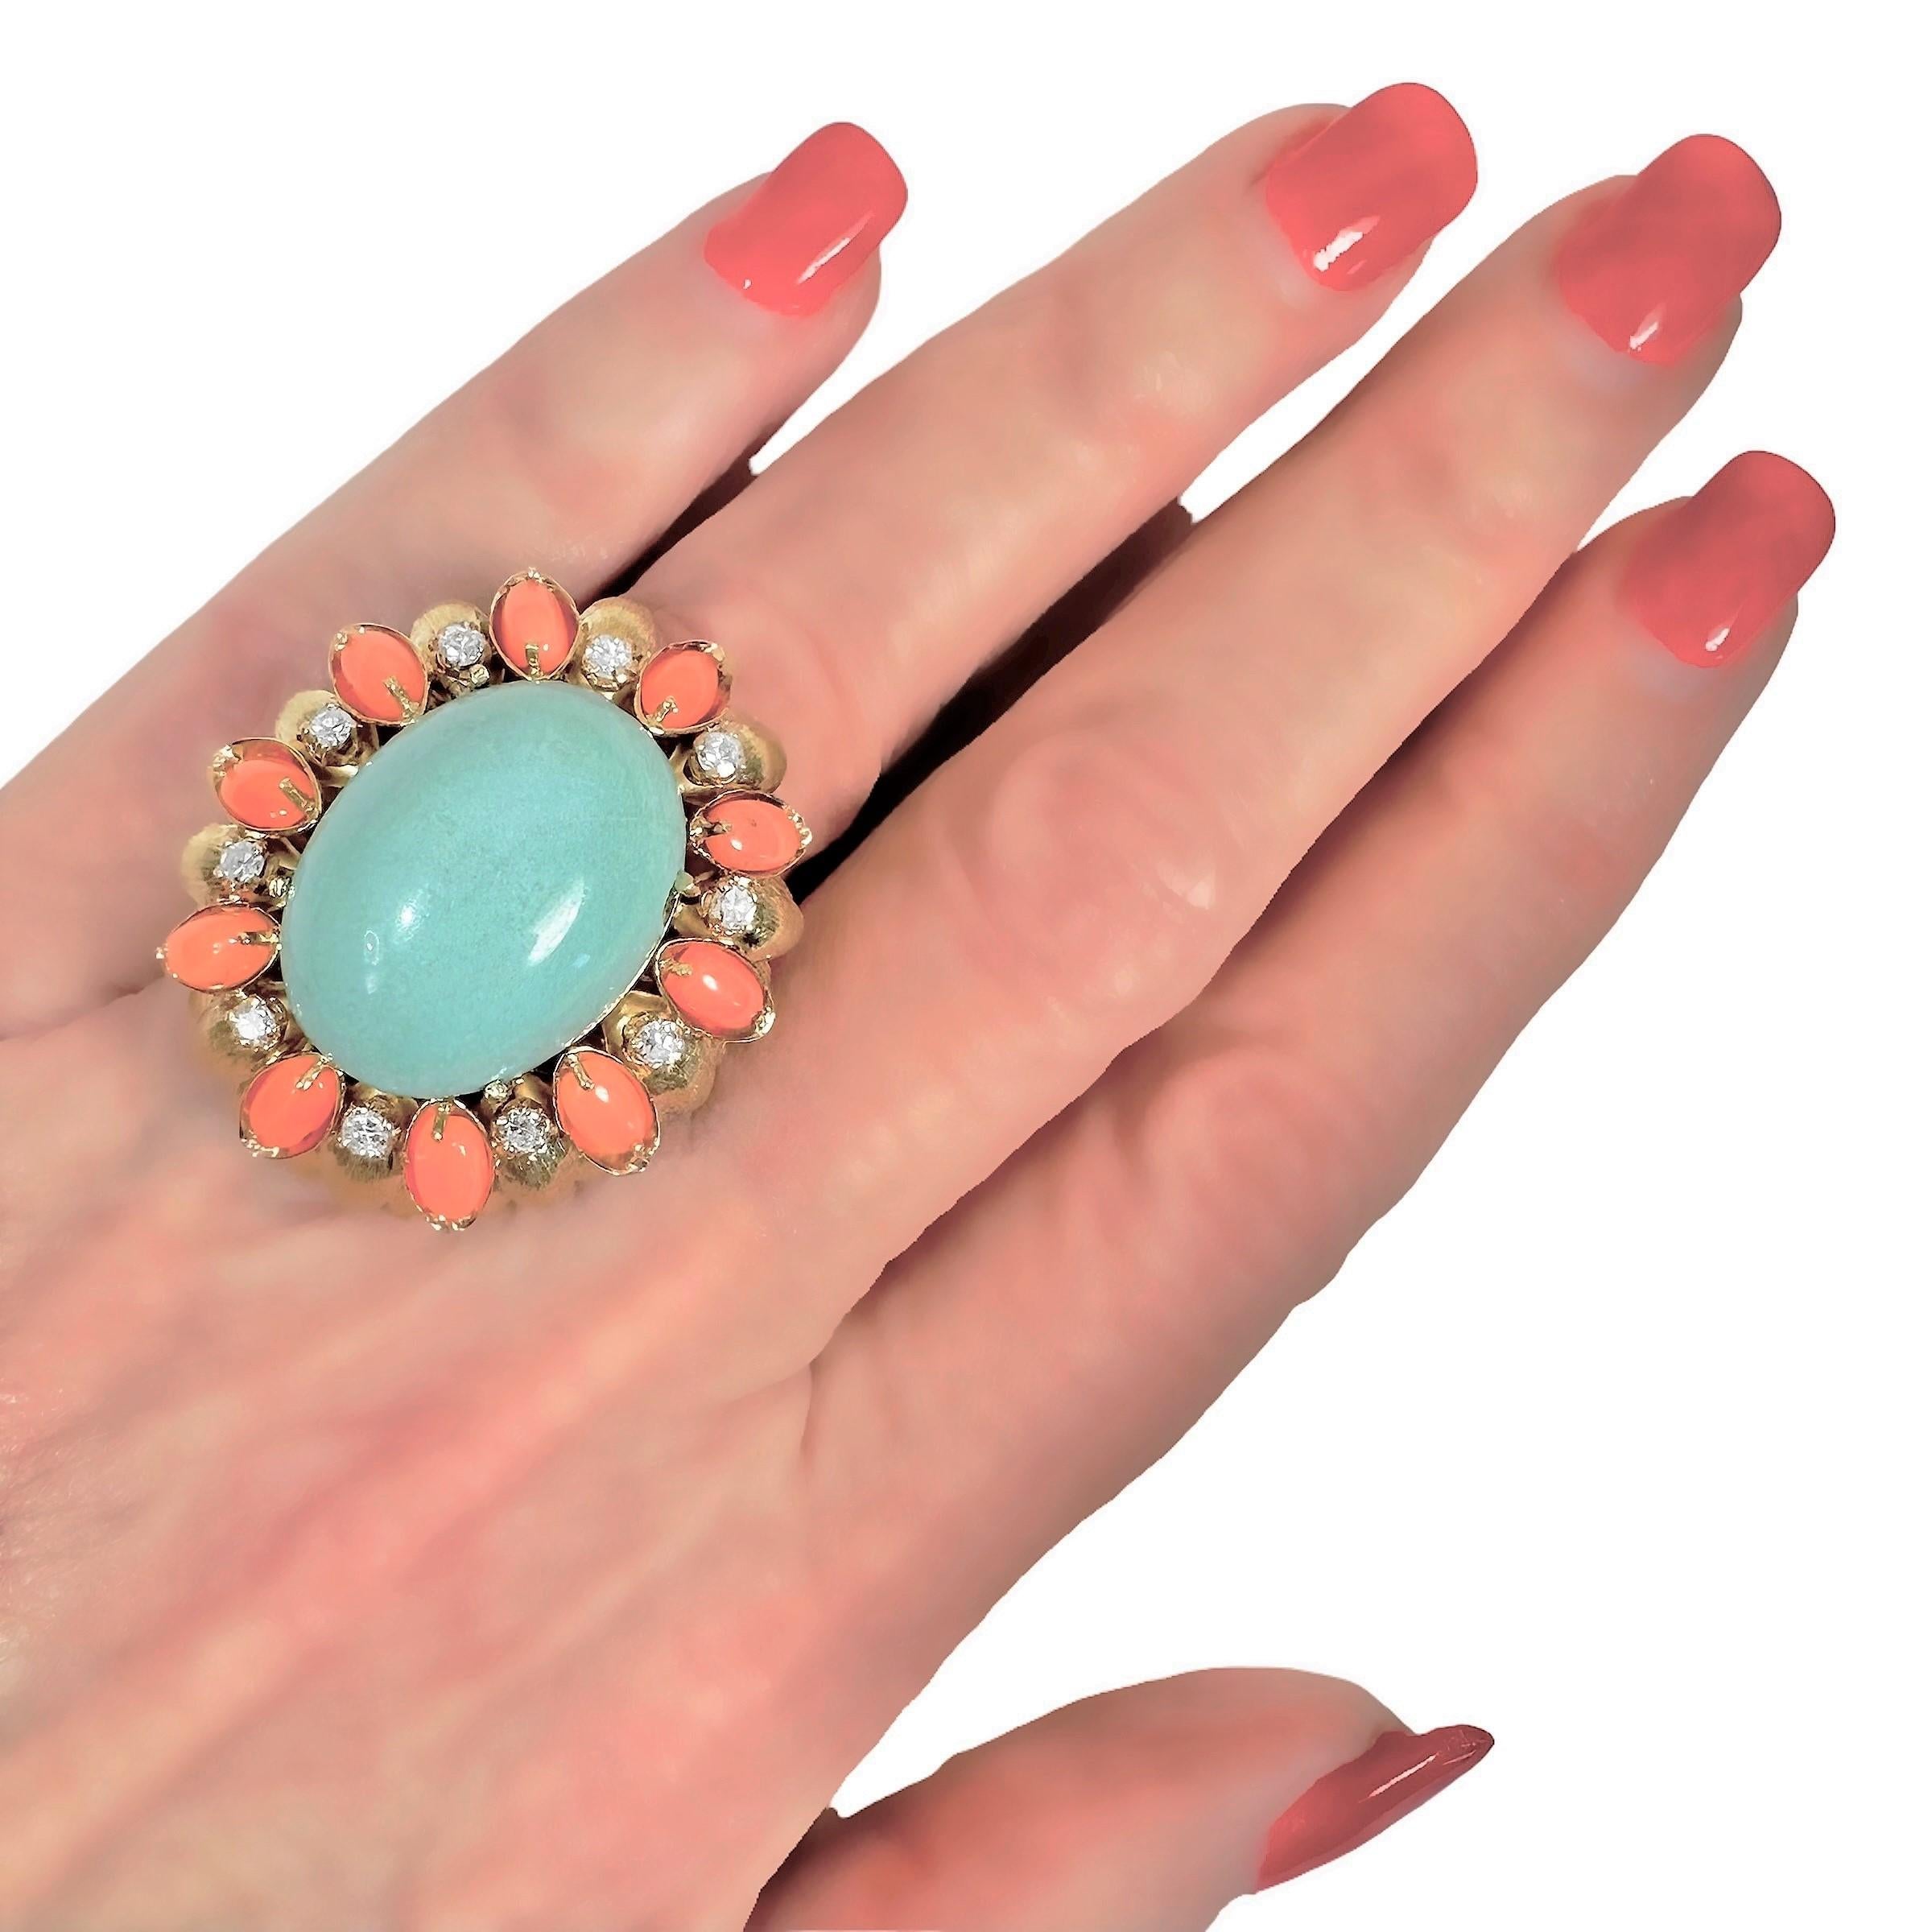 Large Scale Mid-20th Century 18K Yellow Gold, Coral, Turquoise and Diamond Ring For Sale 3